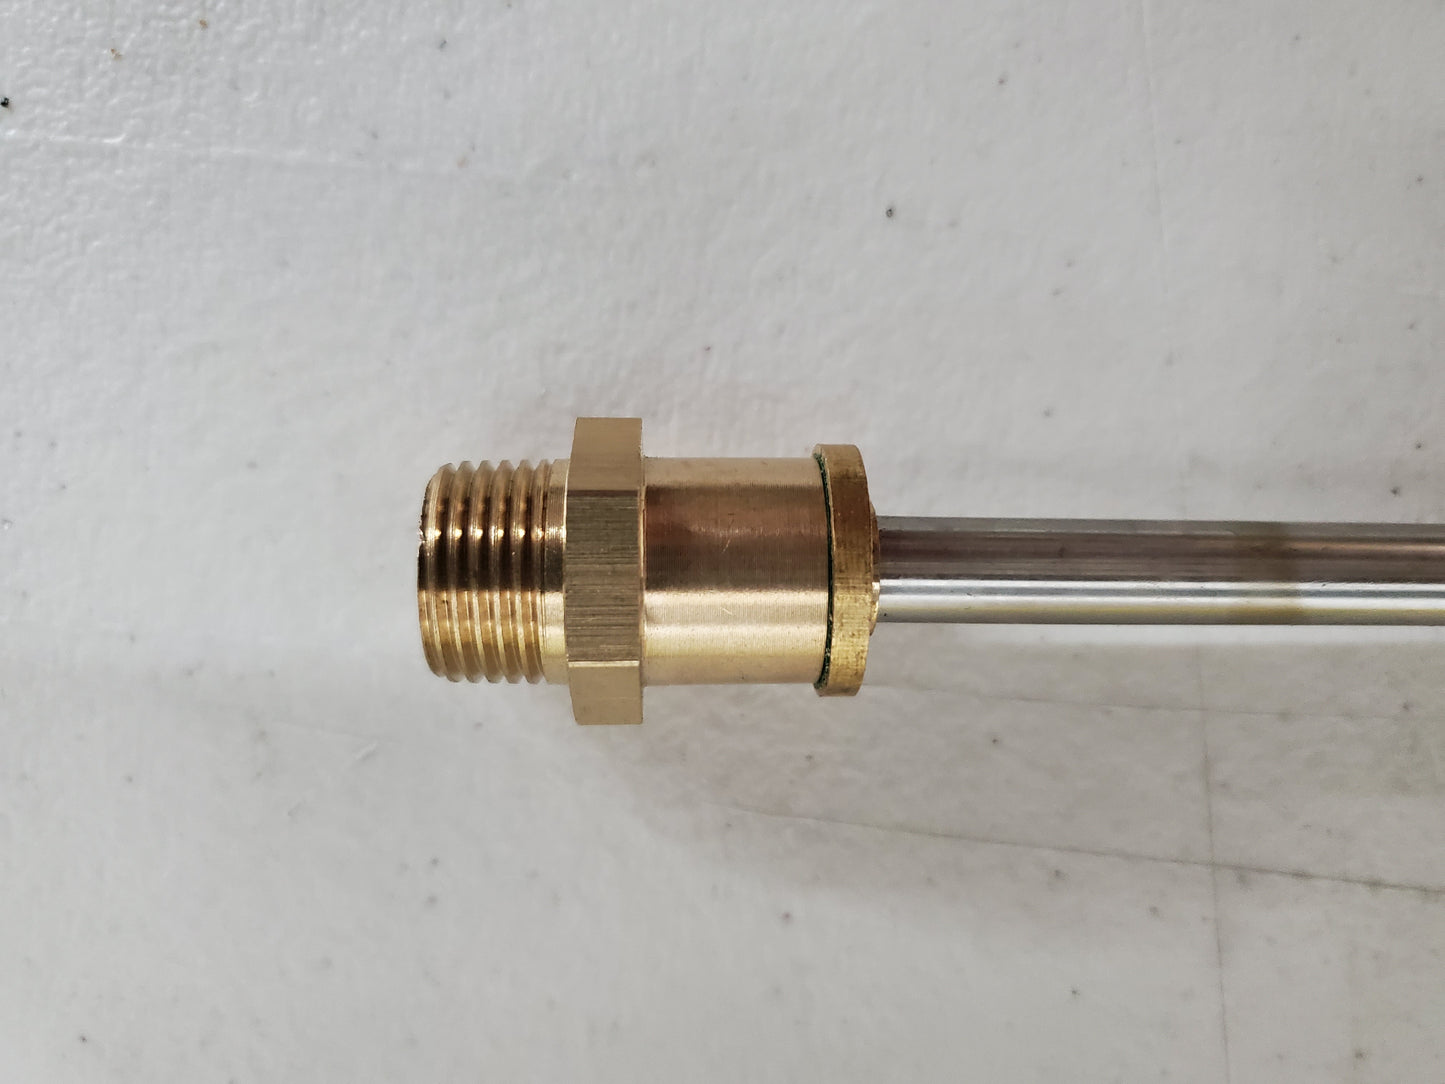 Teejet 3/8 NPT Brass Nozzle Adapter (works with some teejet nozzles)